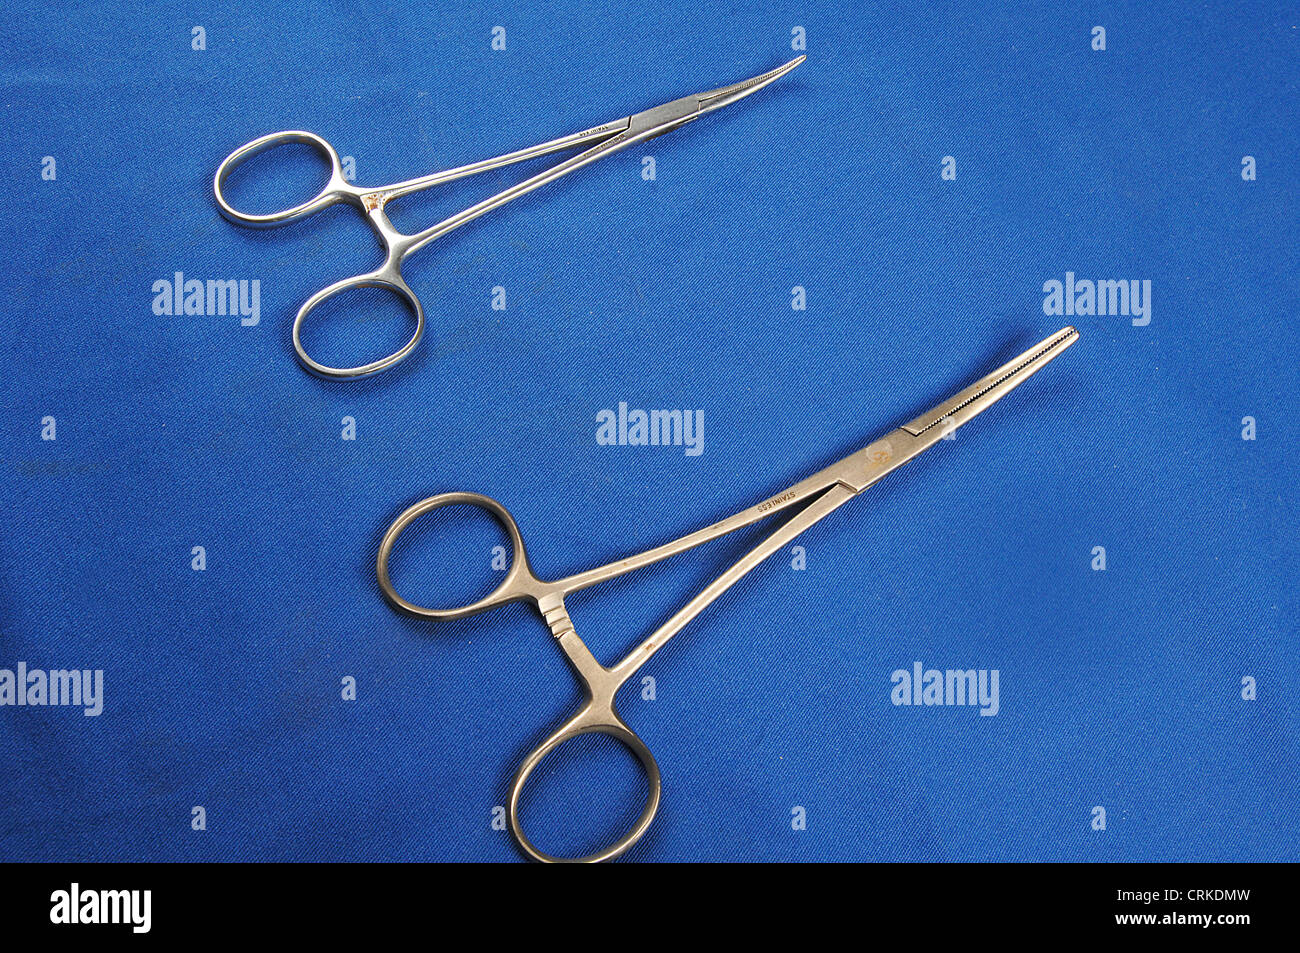 medical clamps Stock Photo